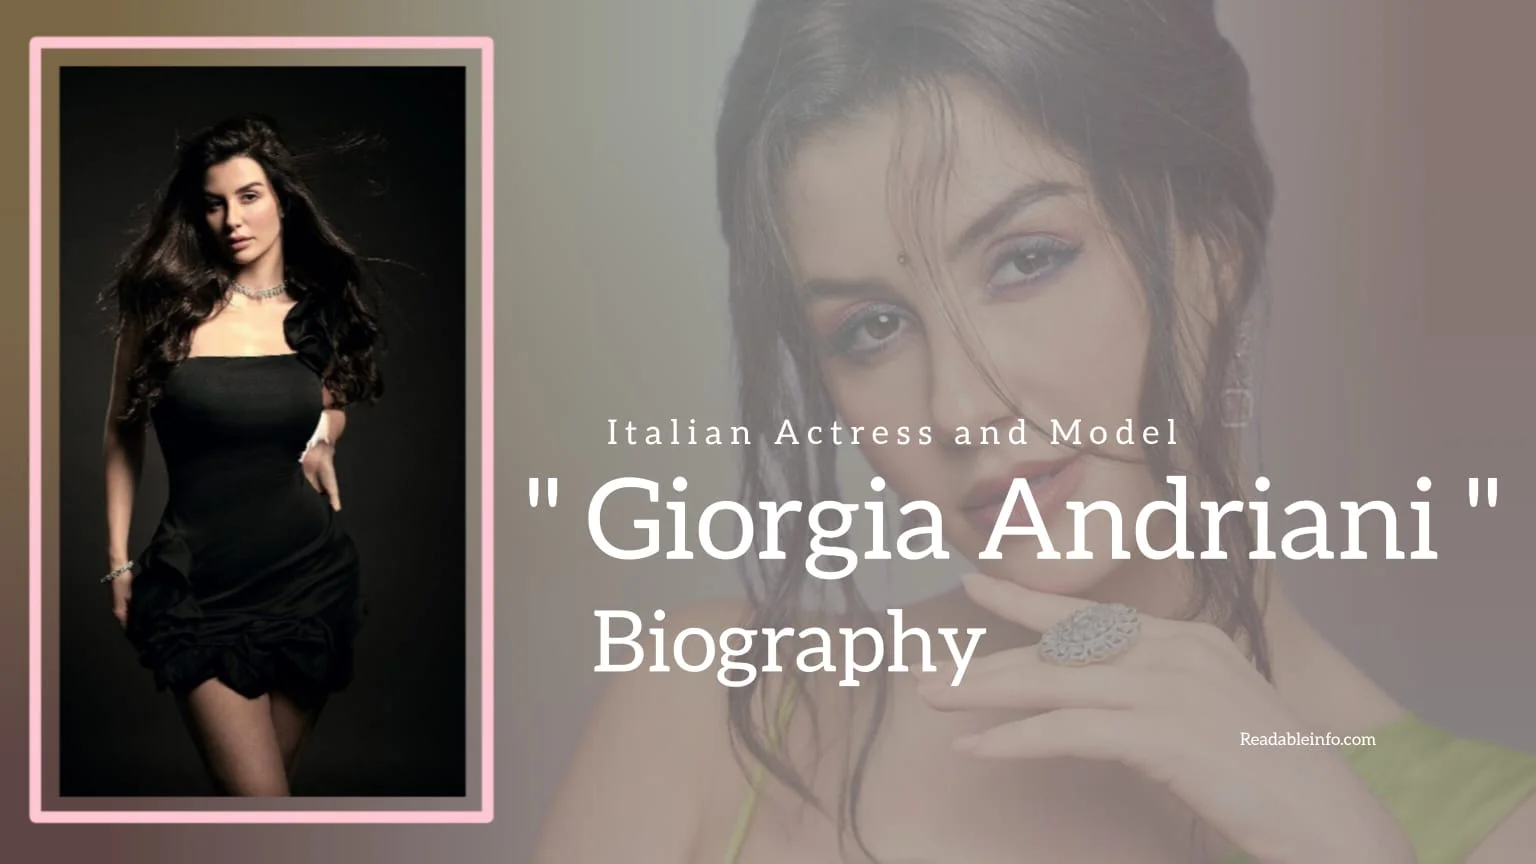 You are currently viewing Giorgia Andriani Biography (Italian Actress and Model)